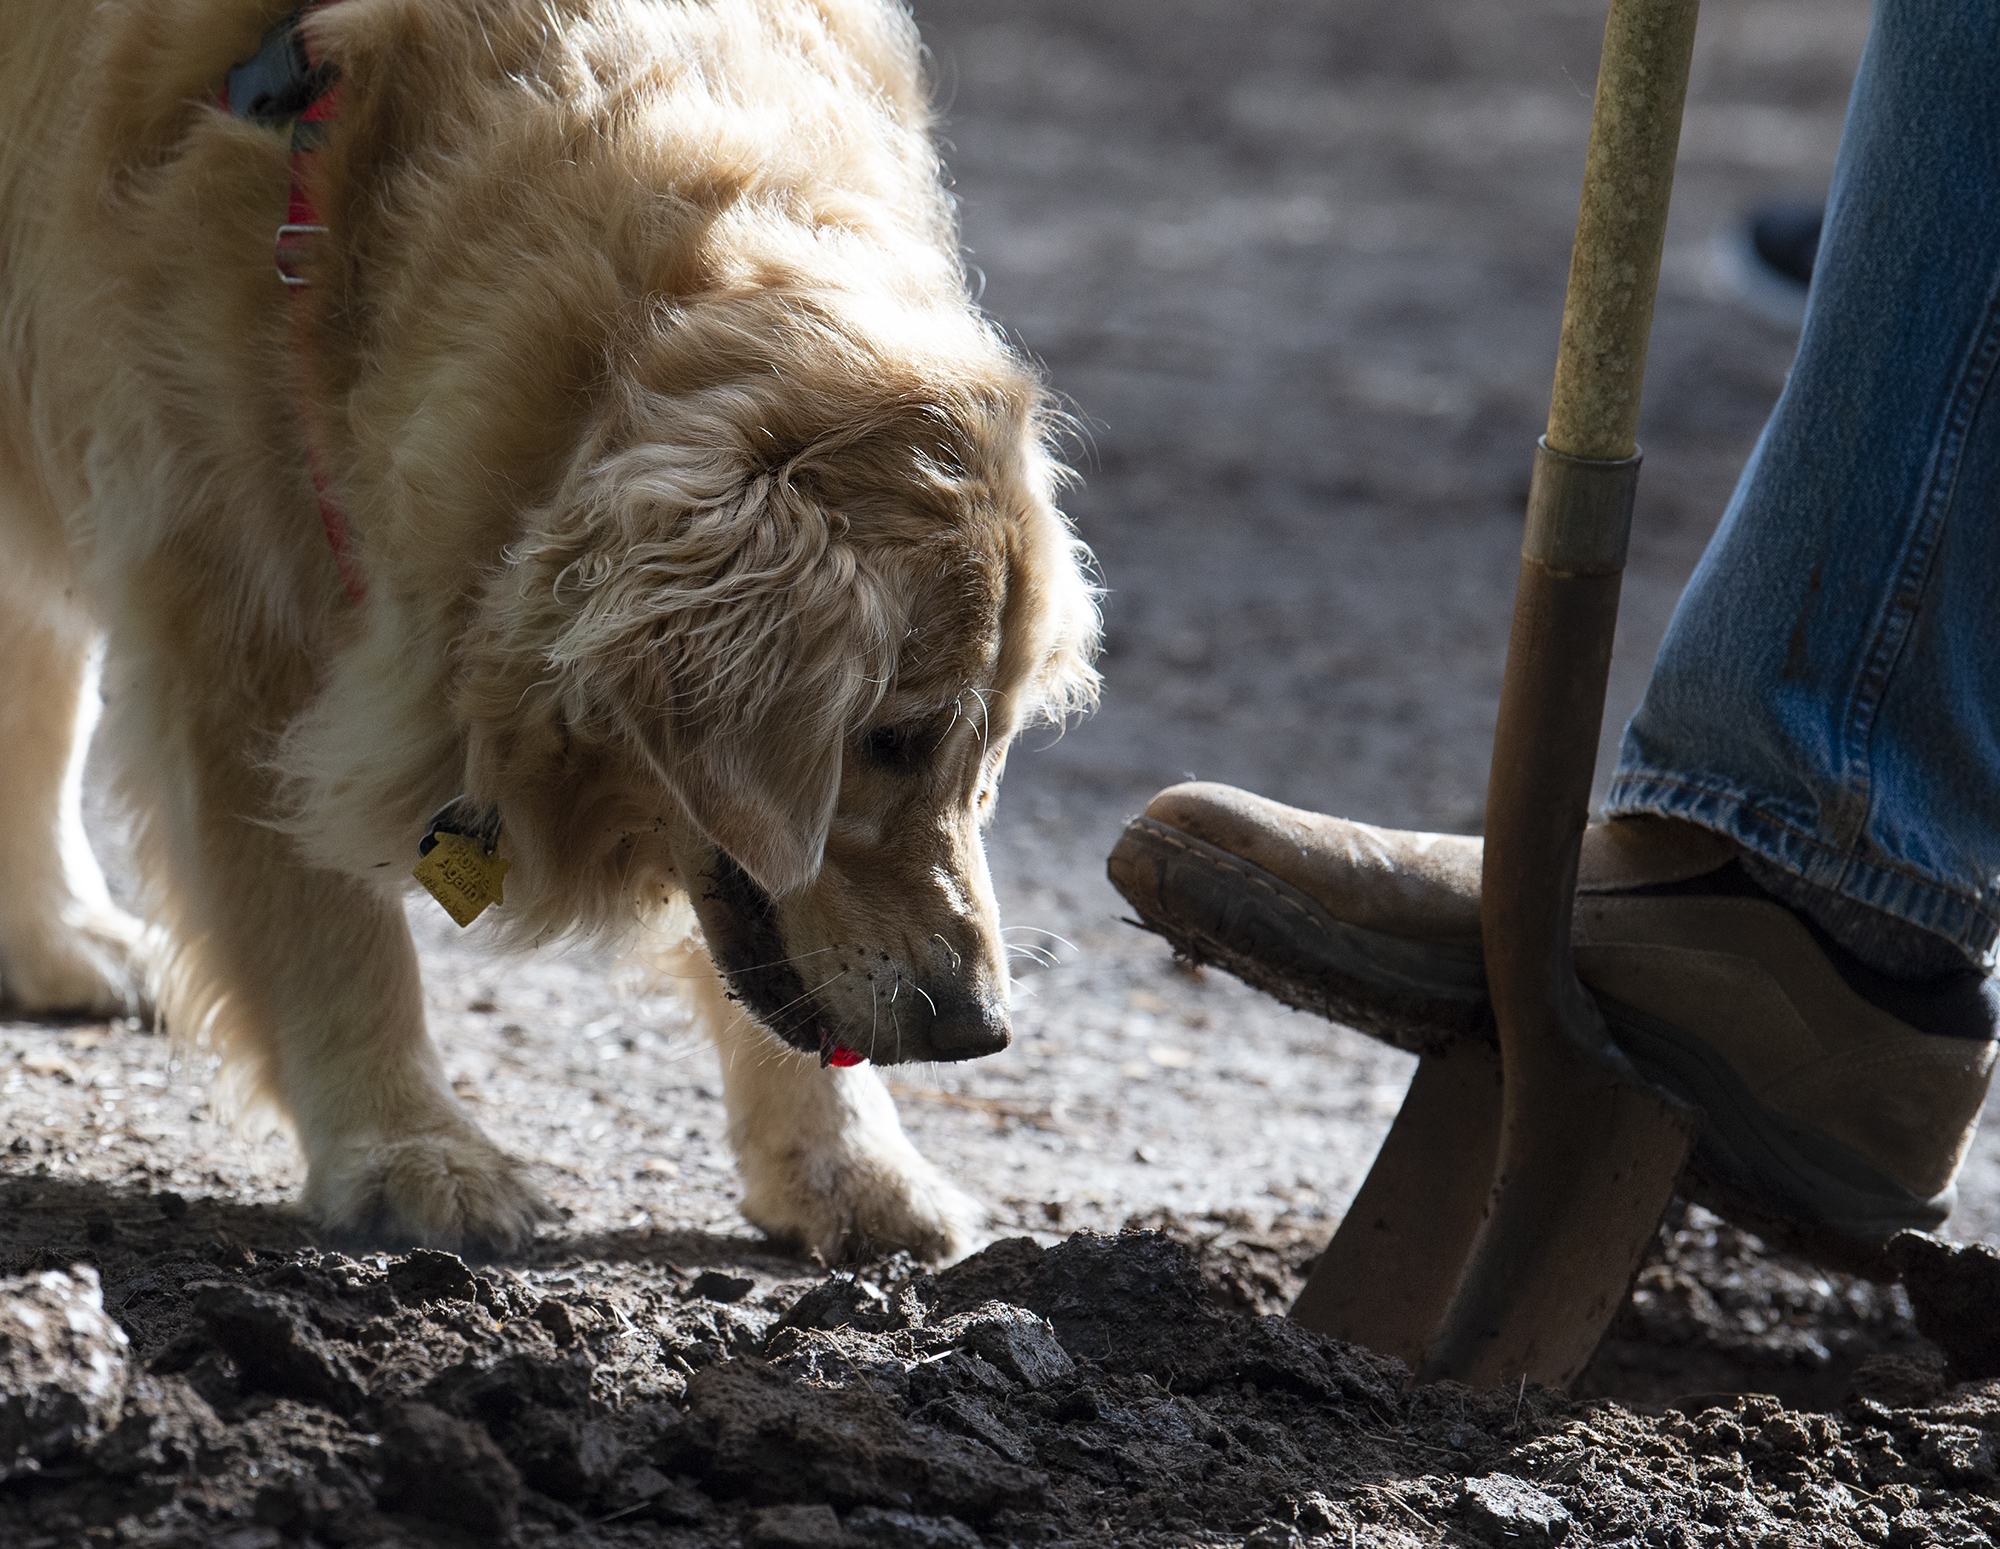 DOGPAW holds volunteer cleanup at Ike Memorial Dog Park photo gallery